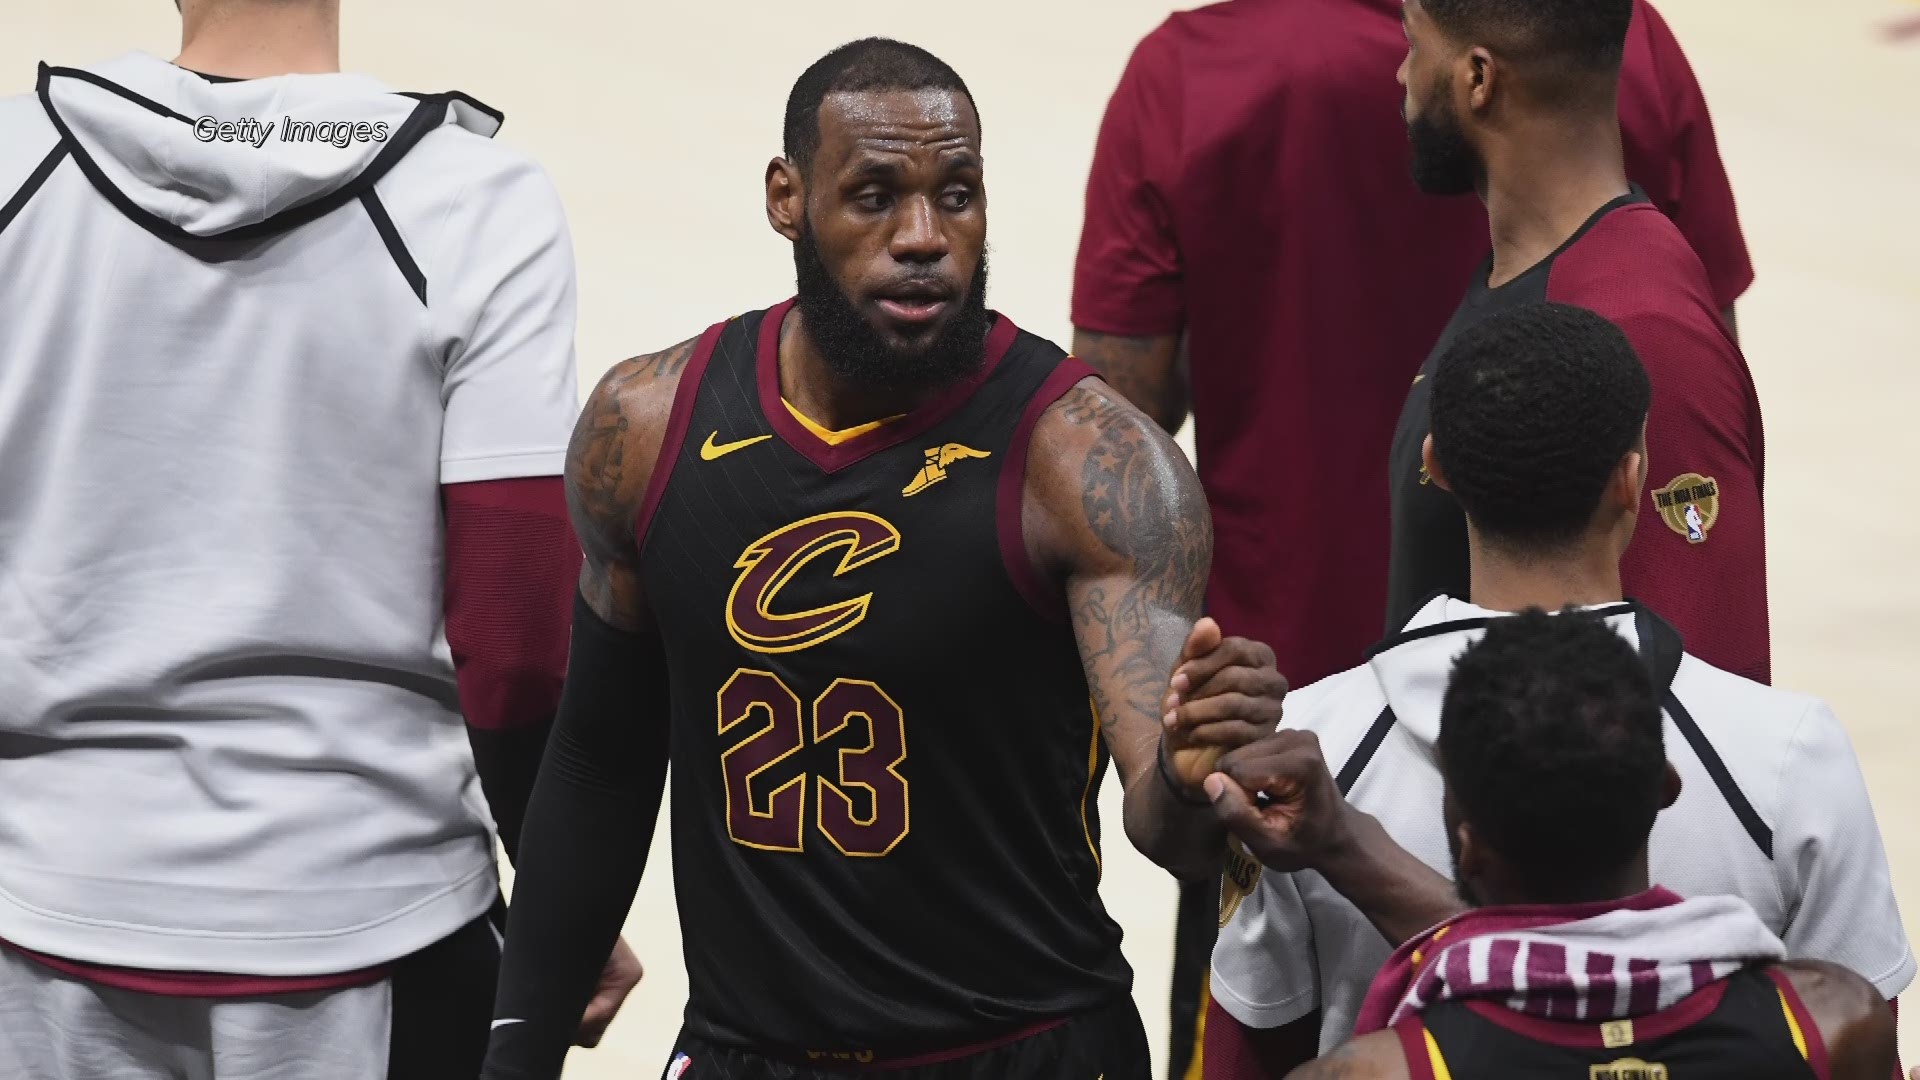 Report: LeBron won't listen to elaborate recruiting pitches in free agency